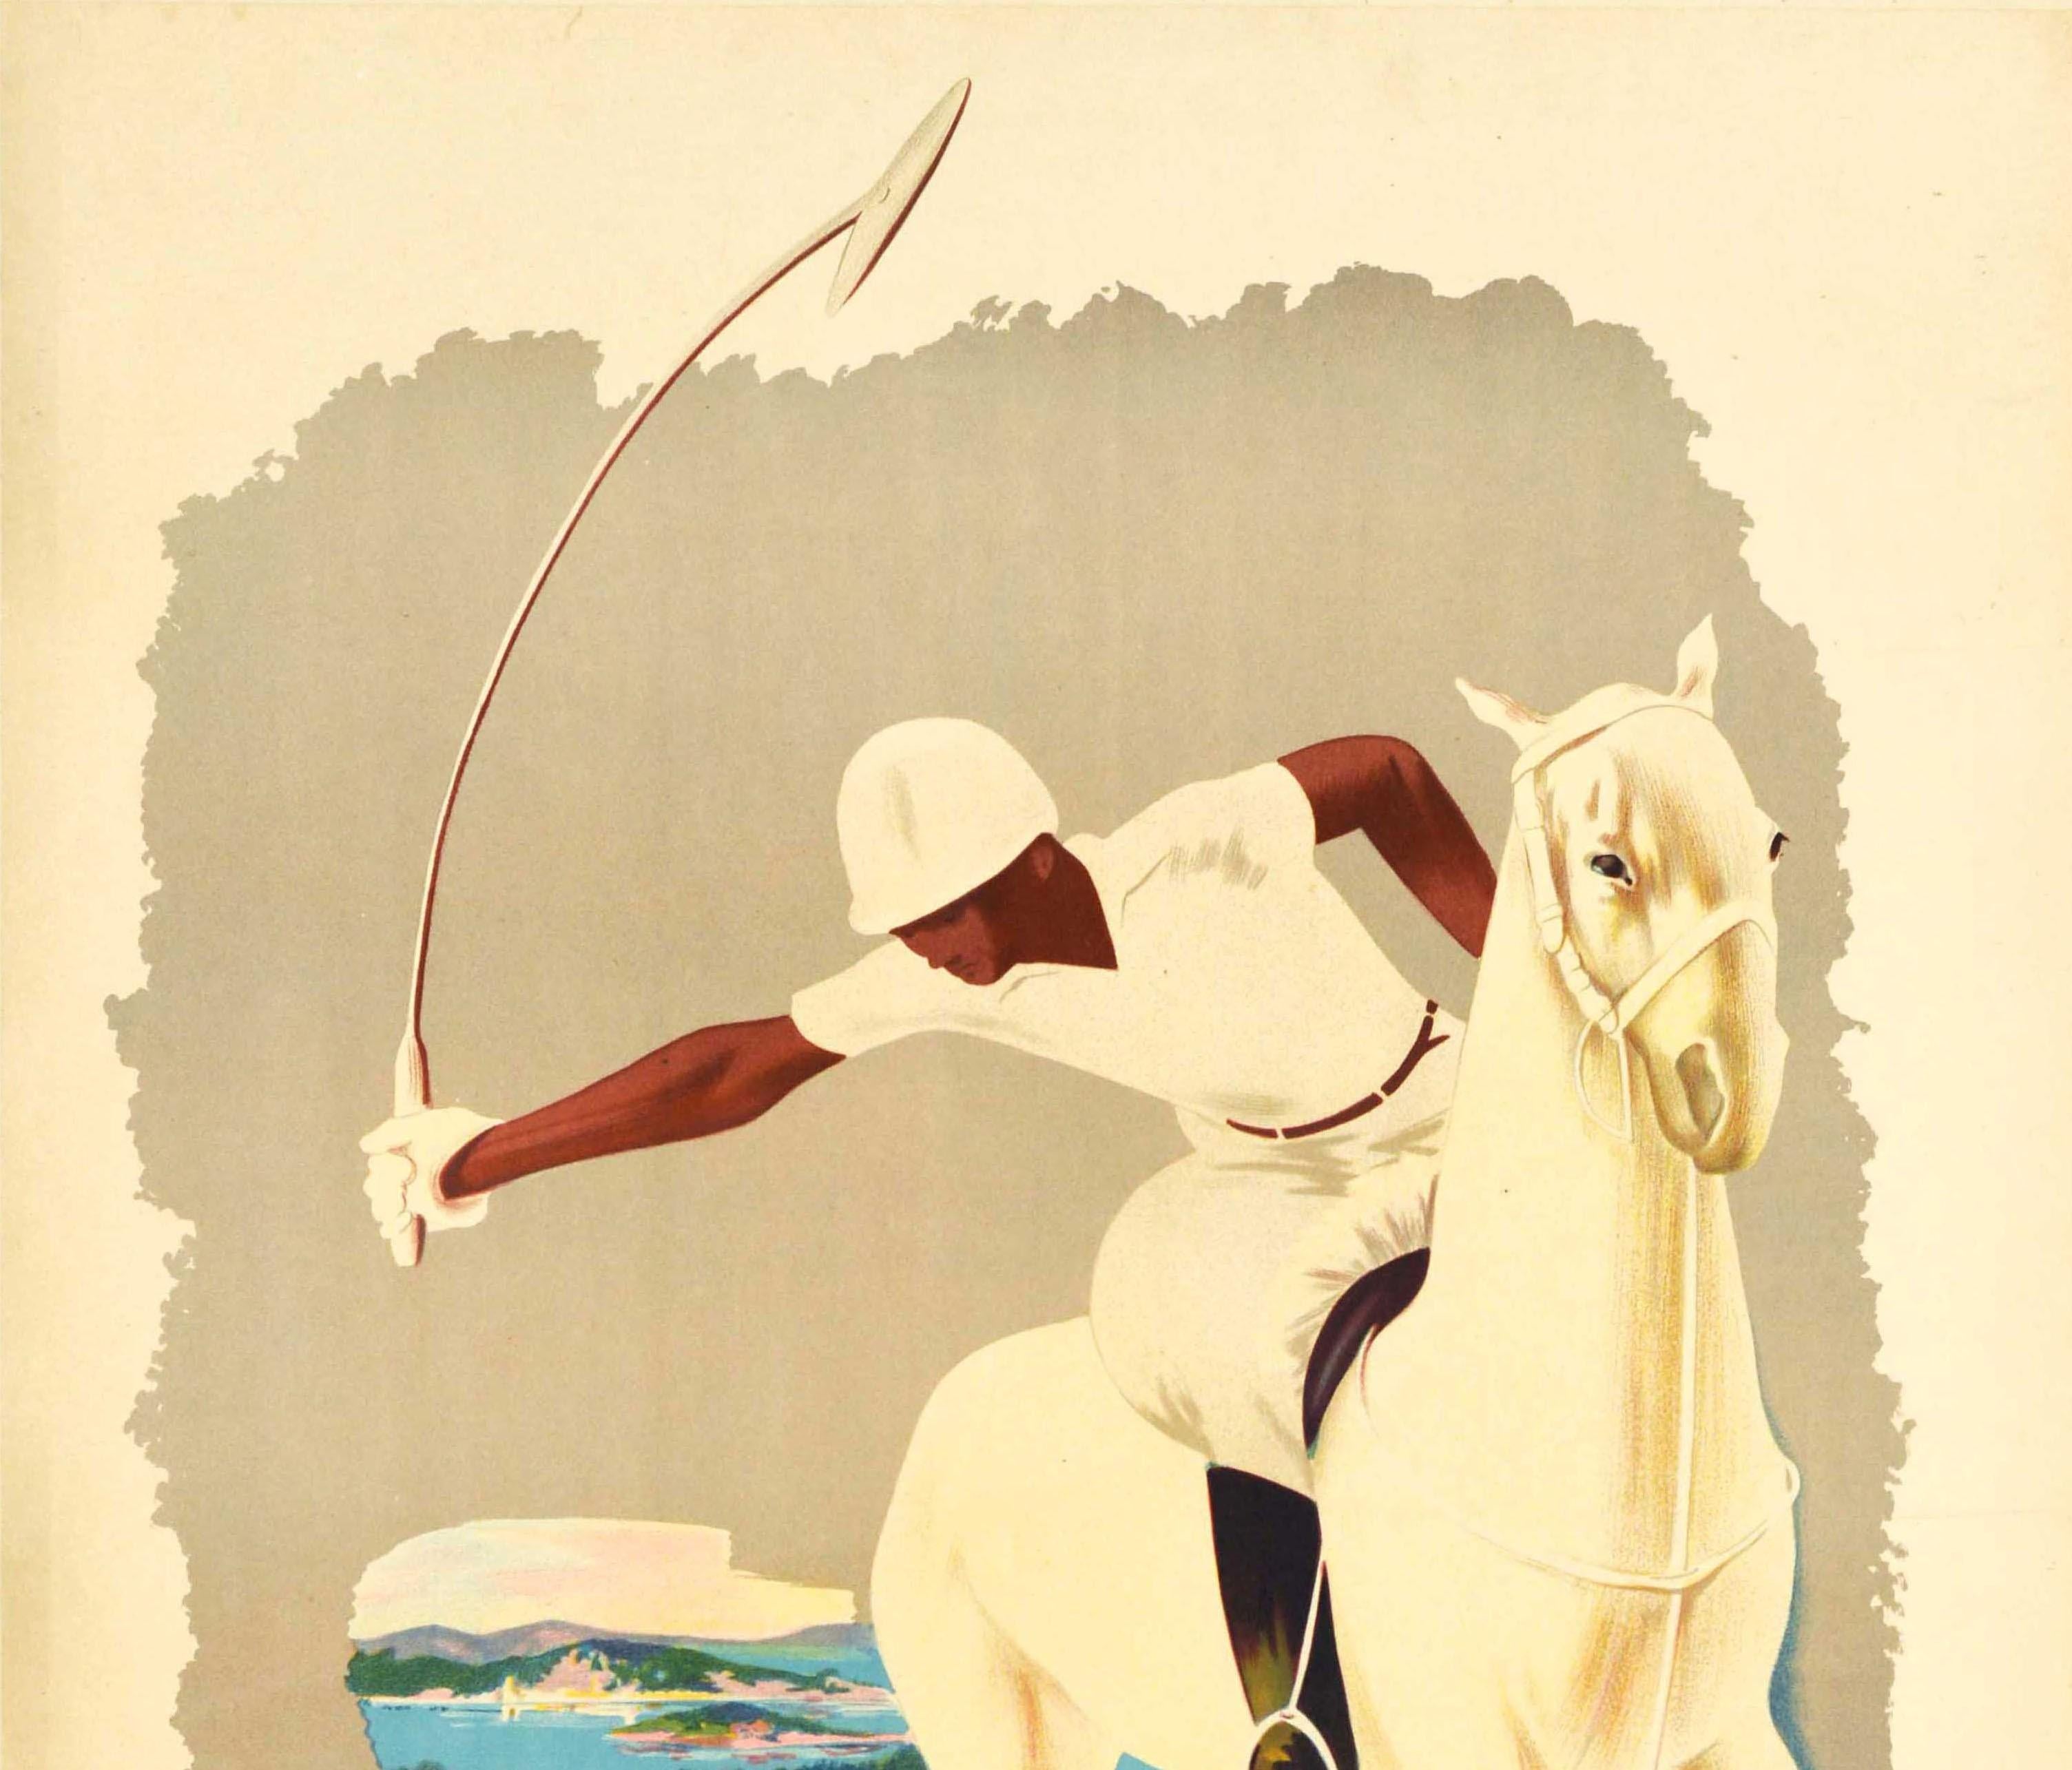 Original vintage poster for Brioni featuring a stunning Art Deco image of a polo player on a white horse about to strike a ball in the foreground with a scenic view depicting sailing boats moored on a calm sea with beaches and hills in the